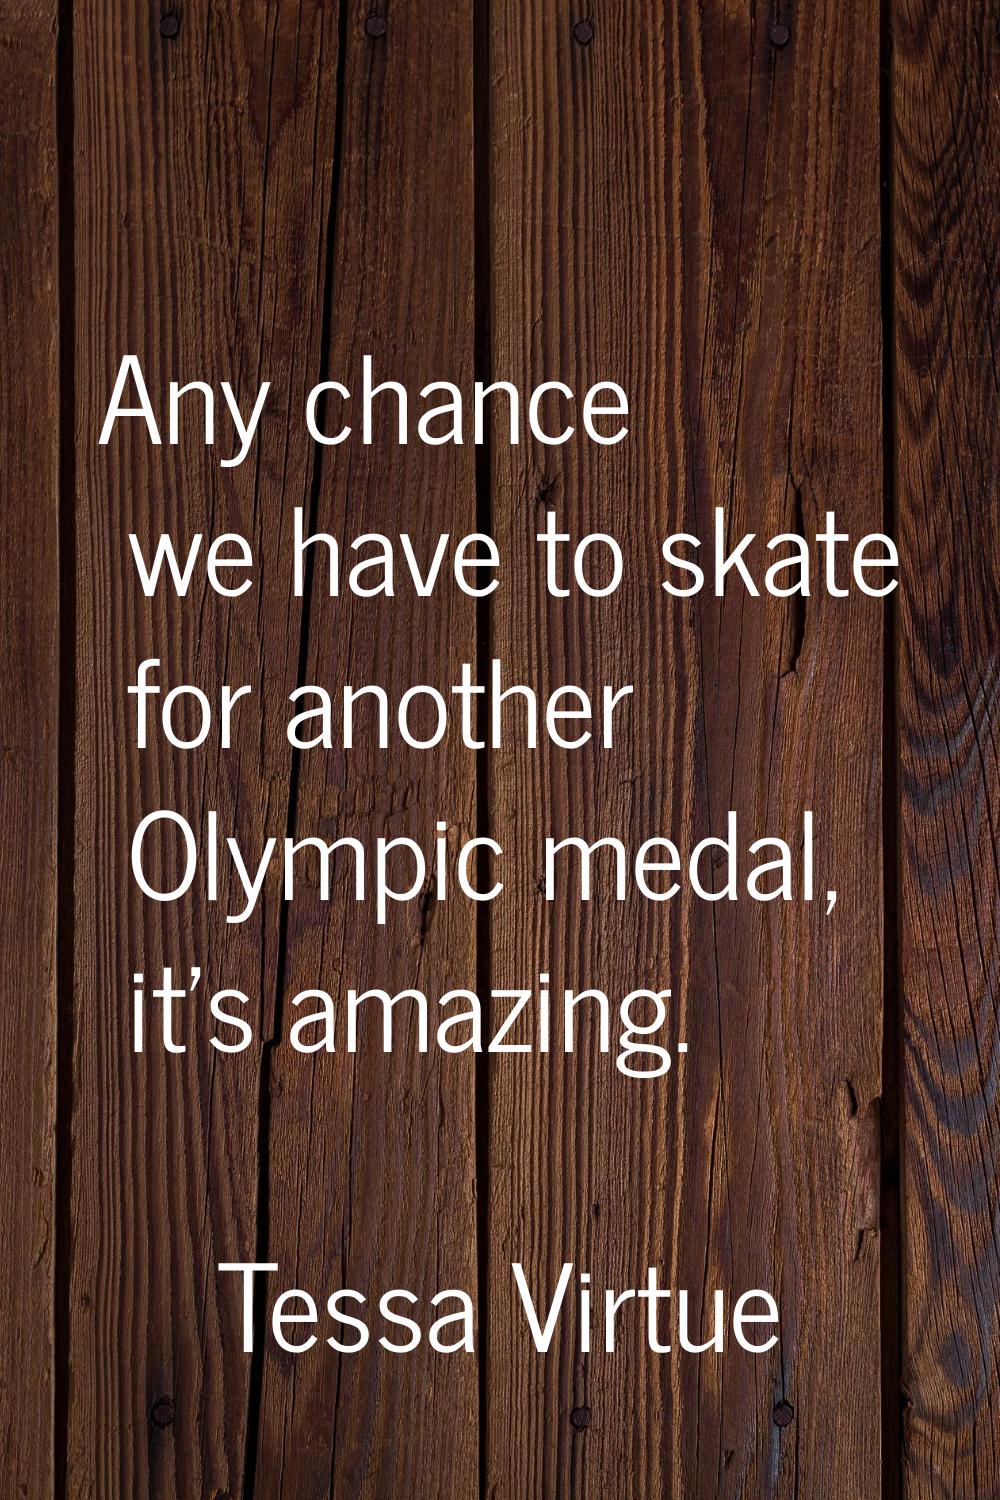 Any chance we have to skate for another Olympic medal, it's amazing.